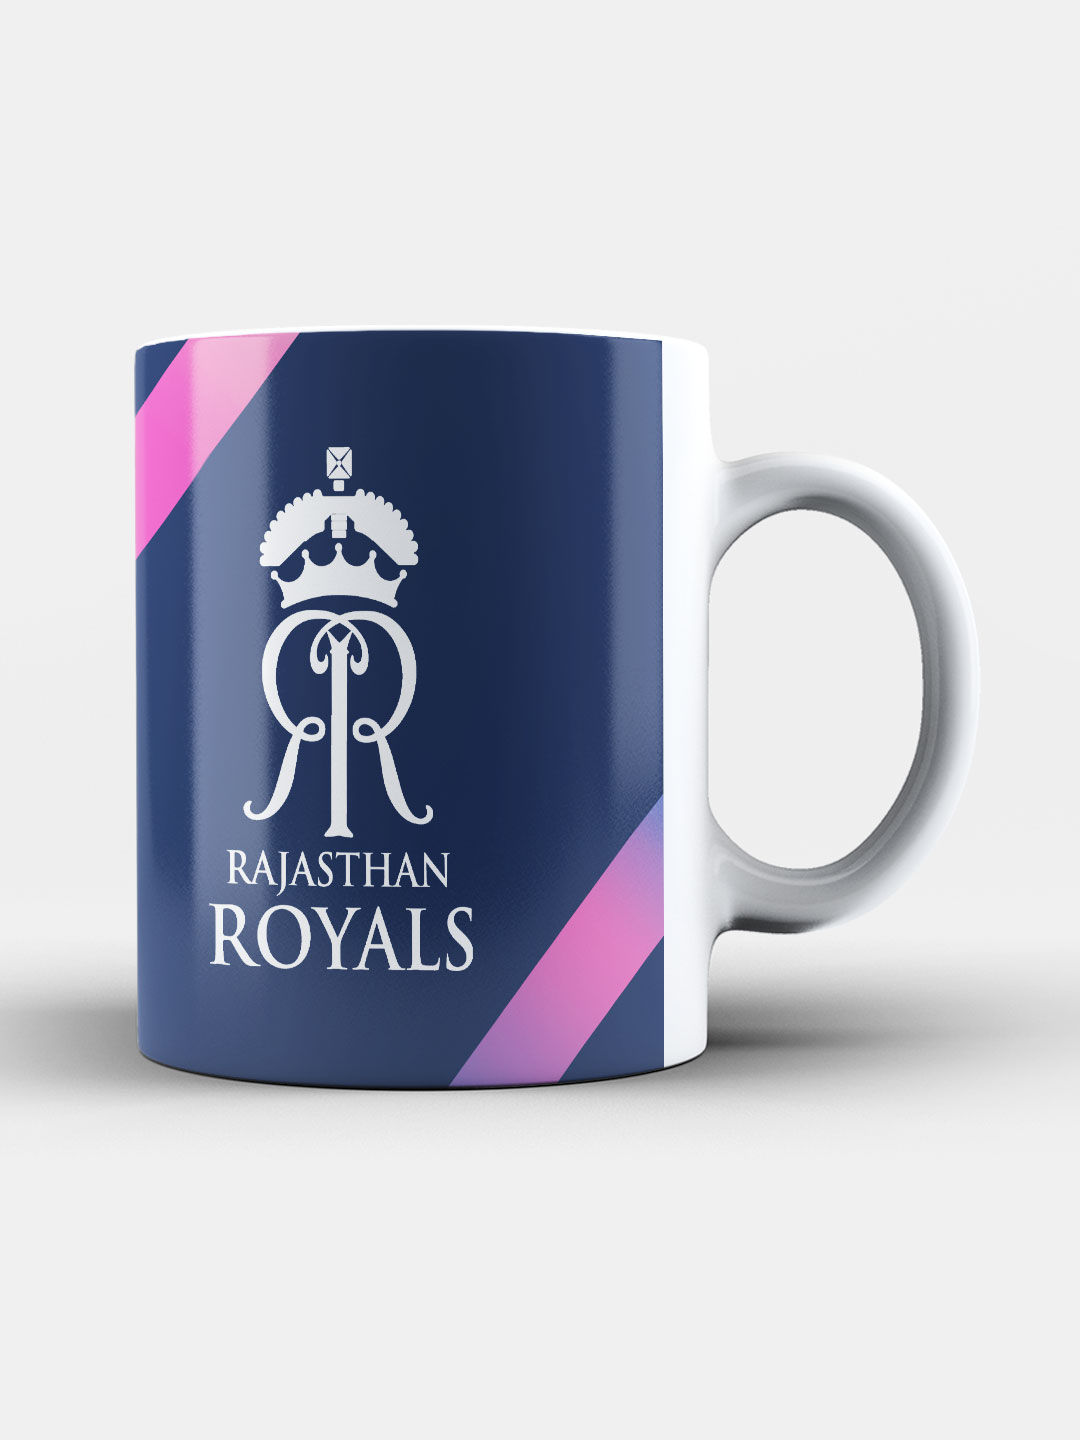 Rajasthan Royals Official Store - Buy RR Merchandise Online